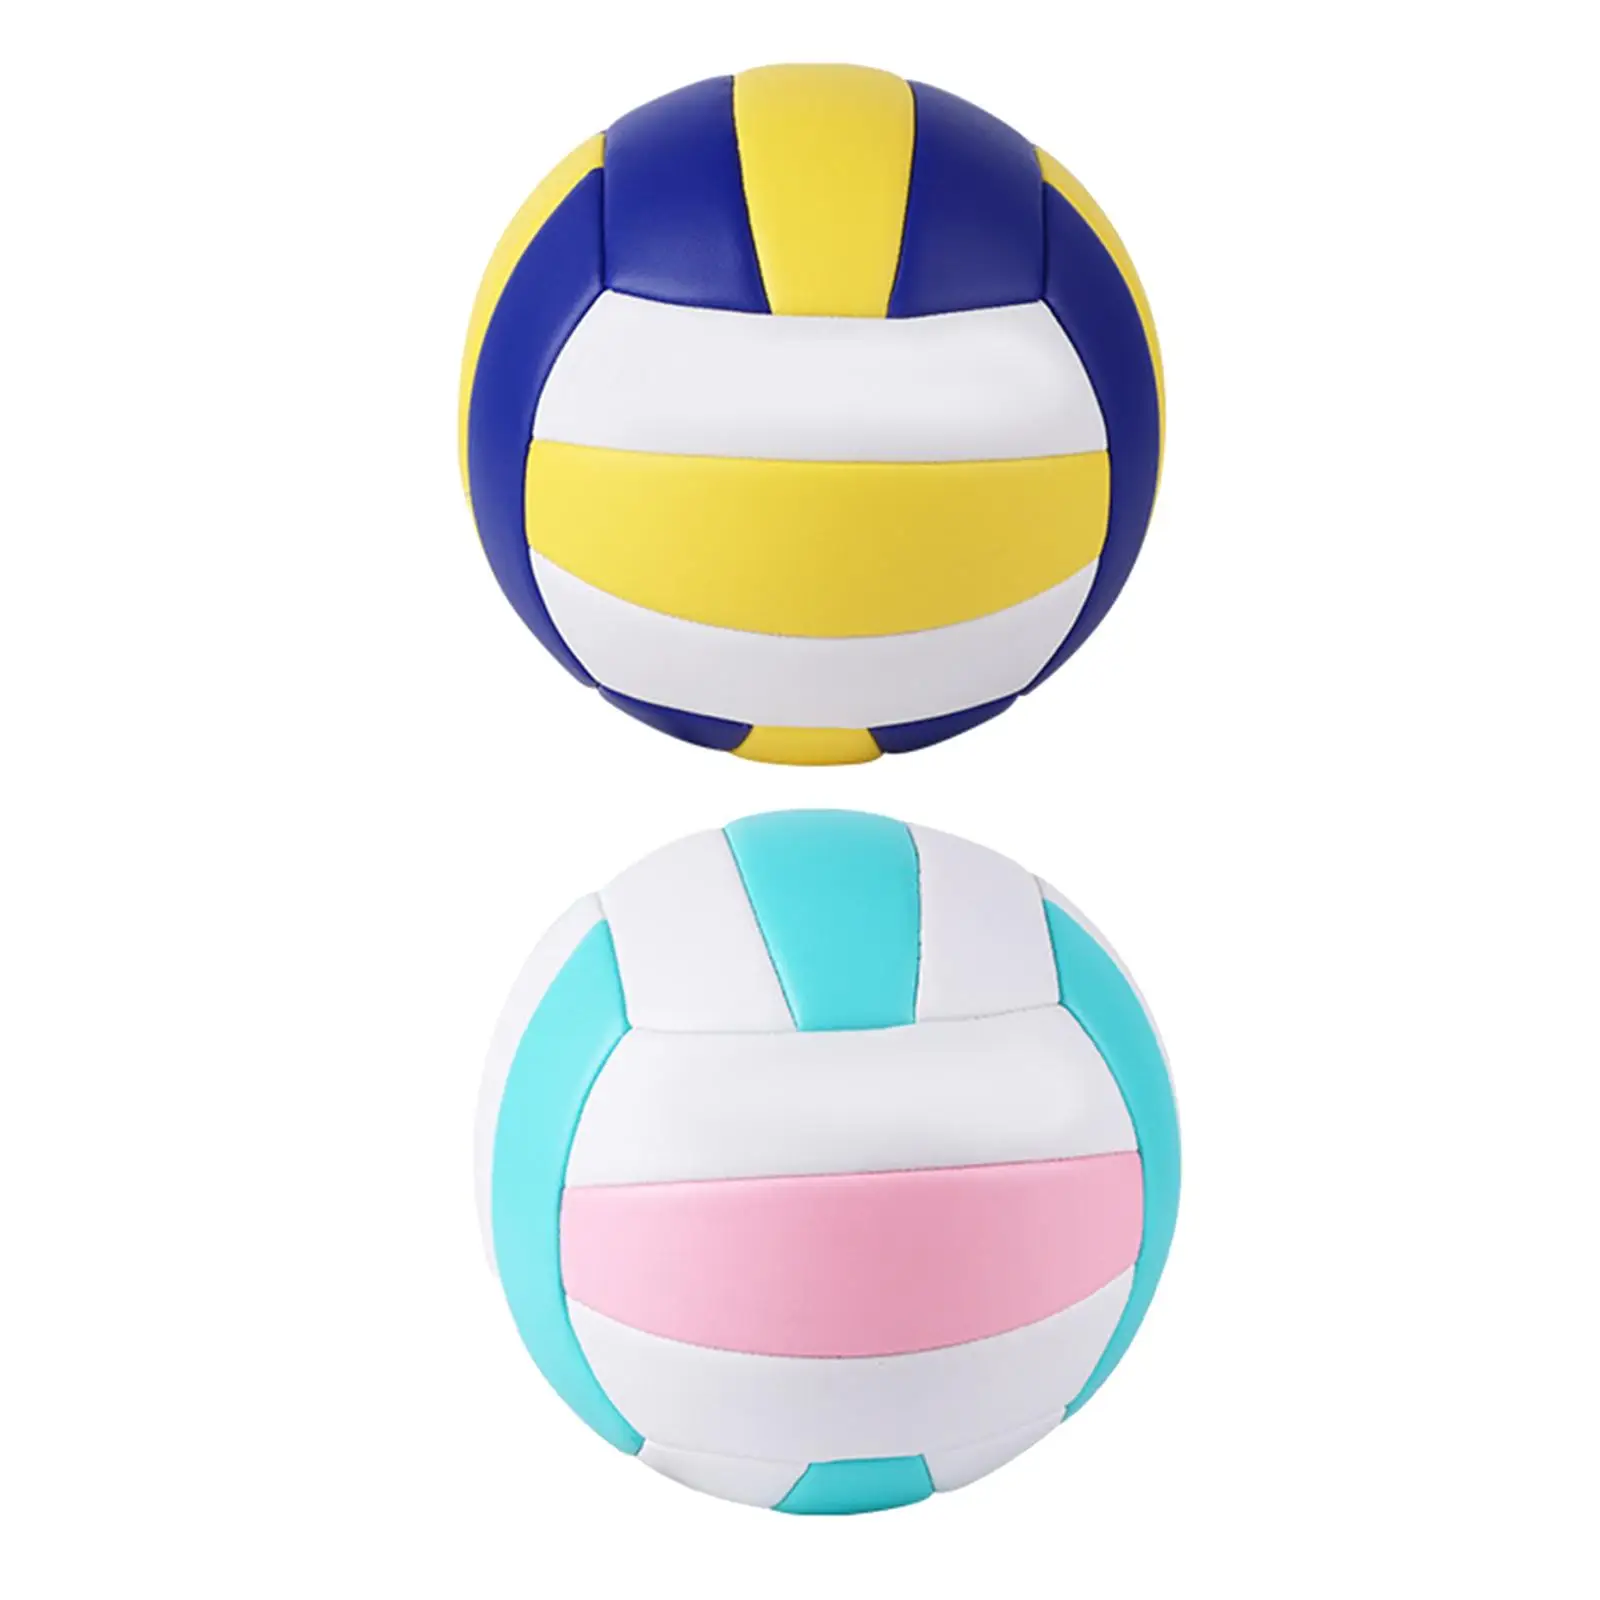 Ball Size 5 PU Leather W/ Ball Pump Indoor Volleyball for Play Teenager